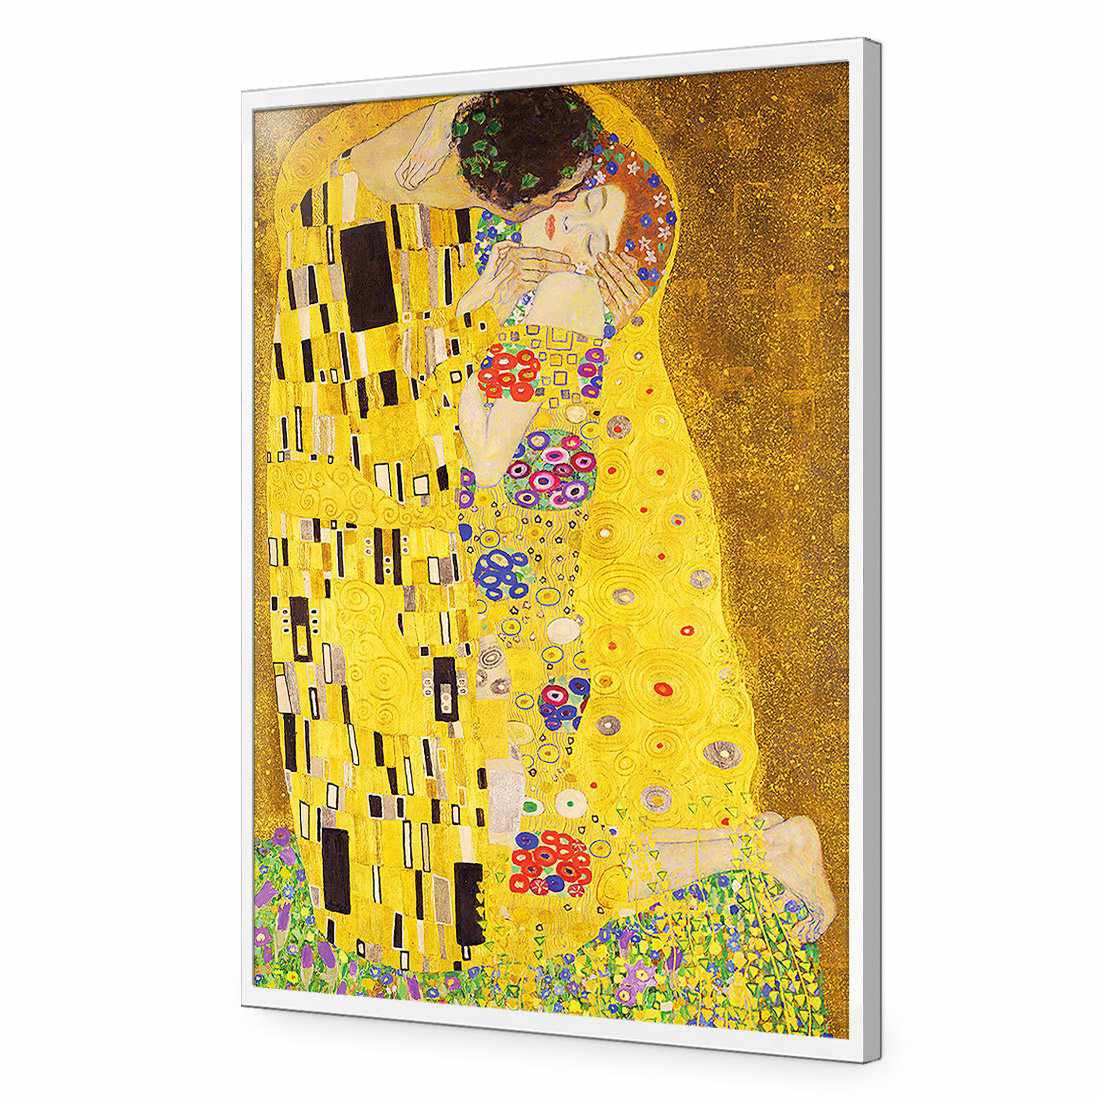 The Kiss-Acrylic-Wall Art Design-Without Border-Acrylic - White Frame-45x30cm-Wall Art Designs